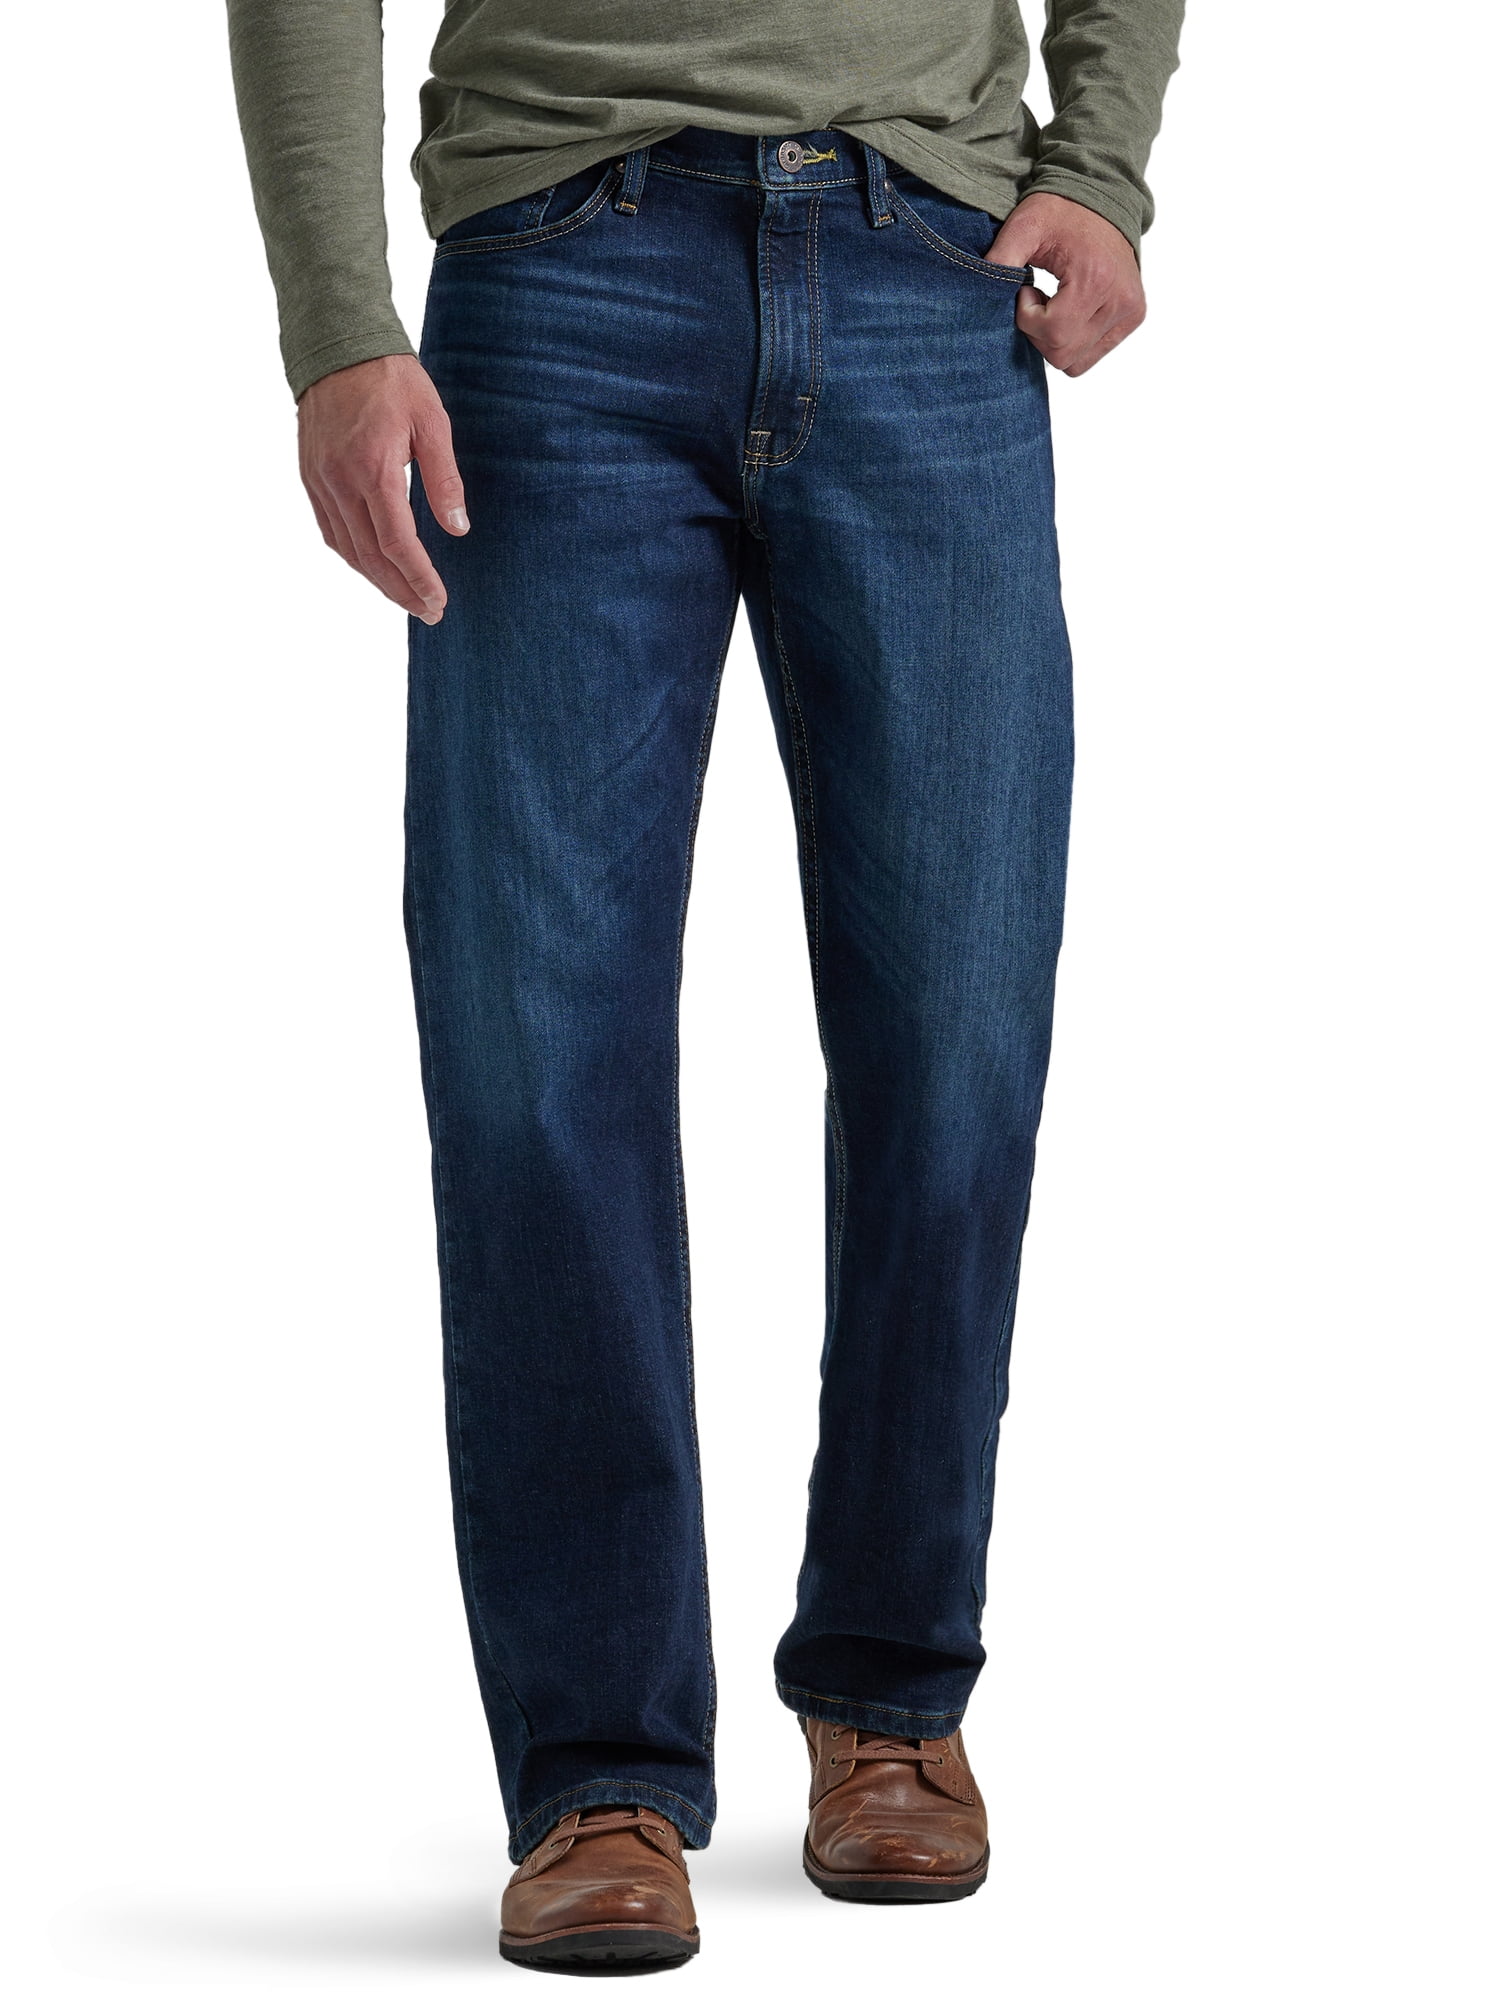 Wrangler Men's Relaxed Bootcut Jean with Stretch, Sizes 30-40